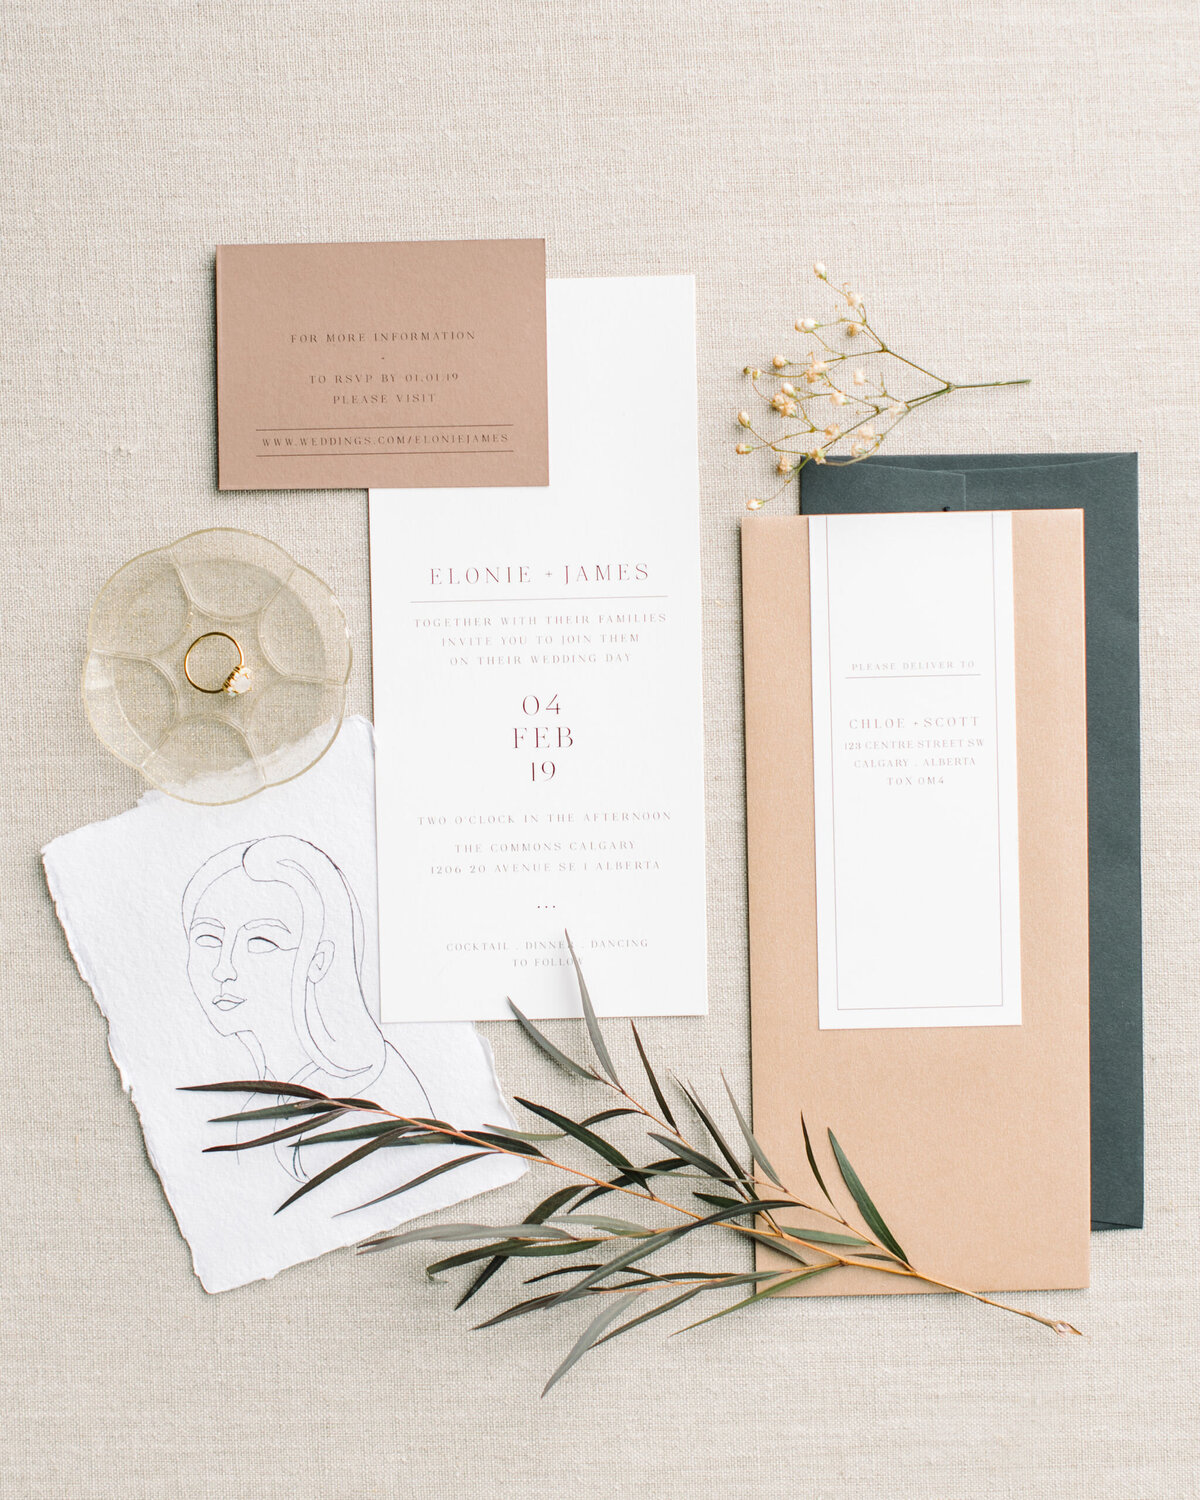 Classic and elegant peach and forest green  wedding invitations by The Social Page, custom wedding invitations & signage based in Calgary, Alberta.  Featured on the Brontë Bride Vendor Guide.